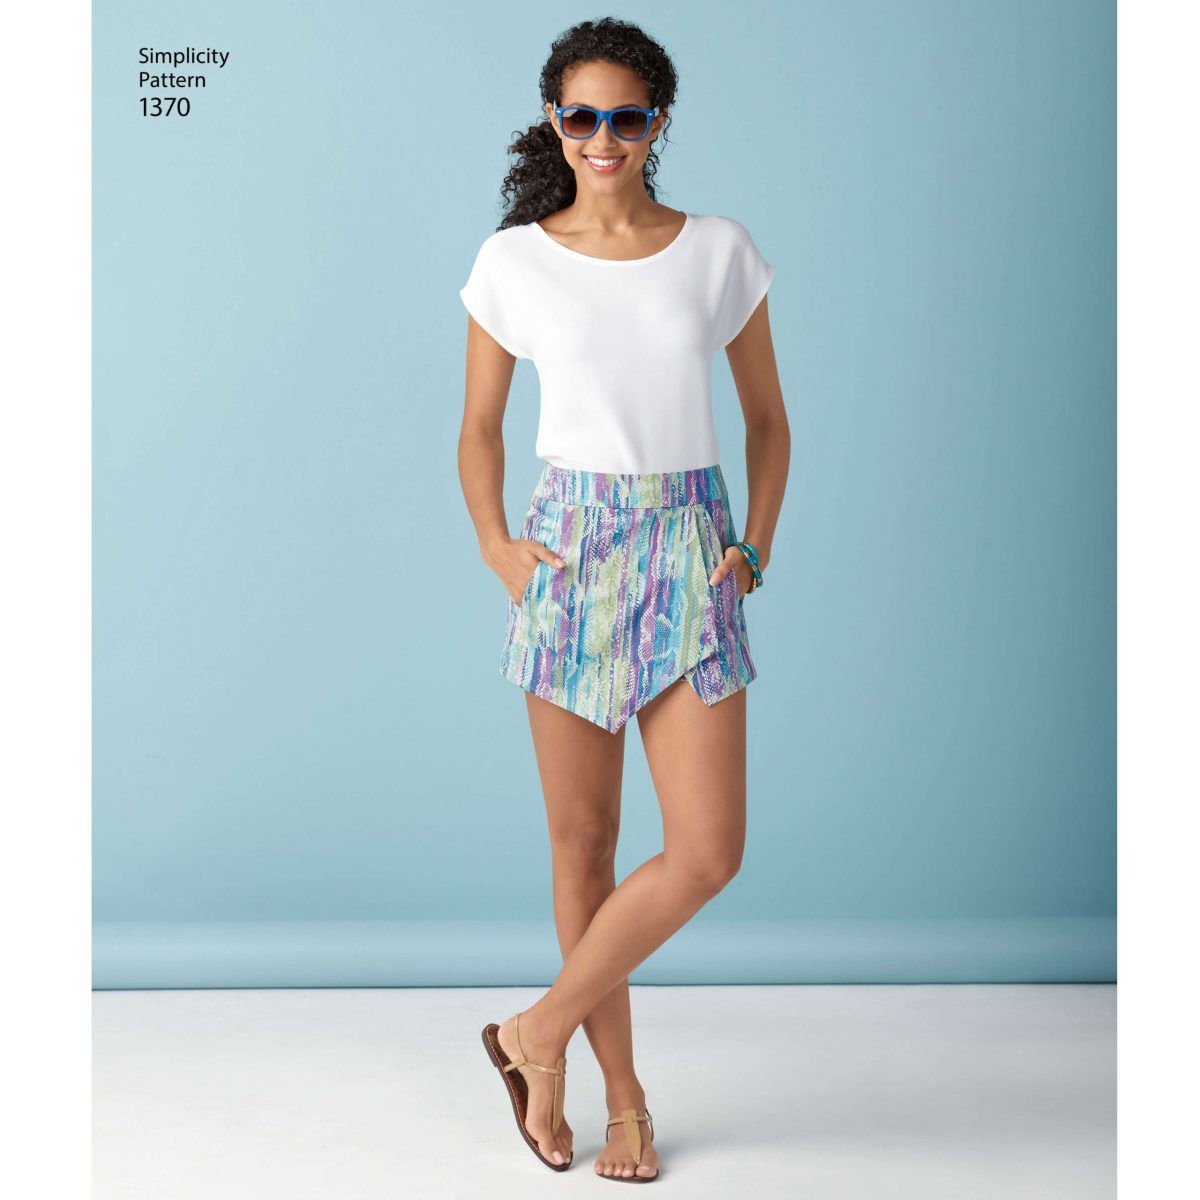 Simplicity Sewing Pattern 1370 Misses' Shorts, Skort and Skirt